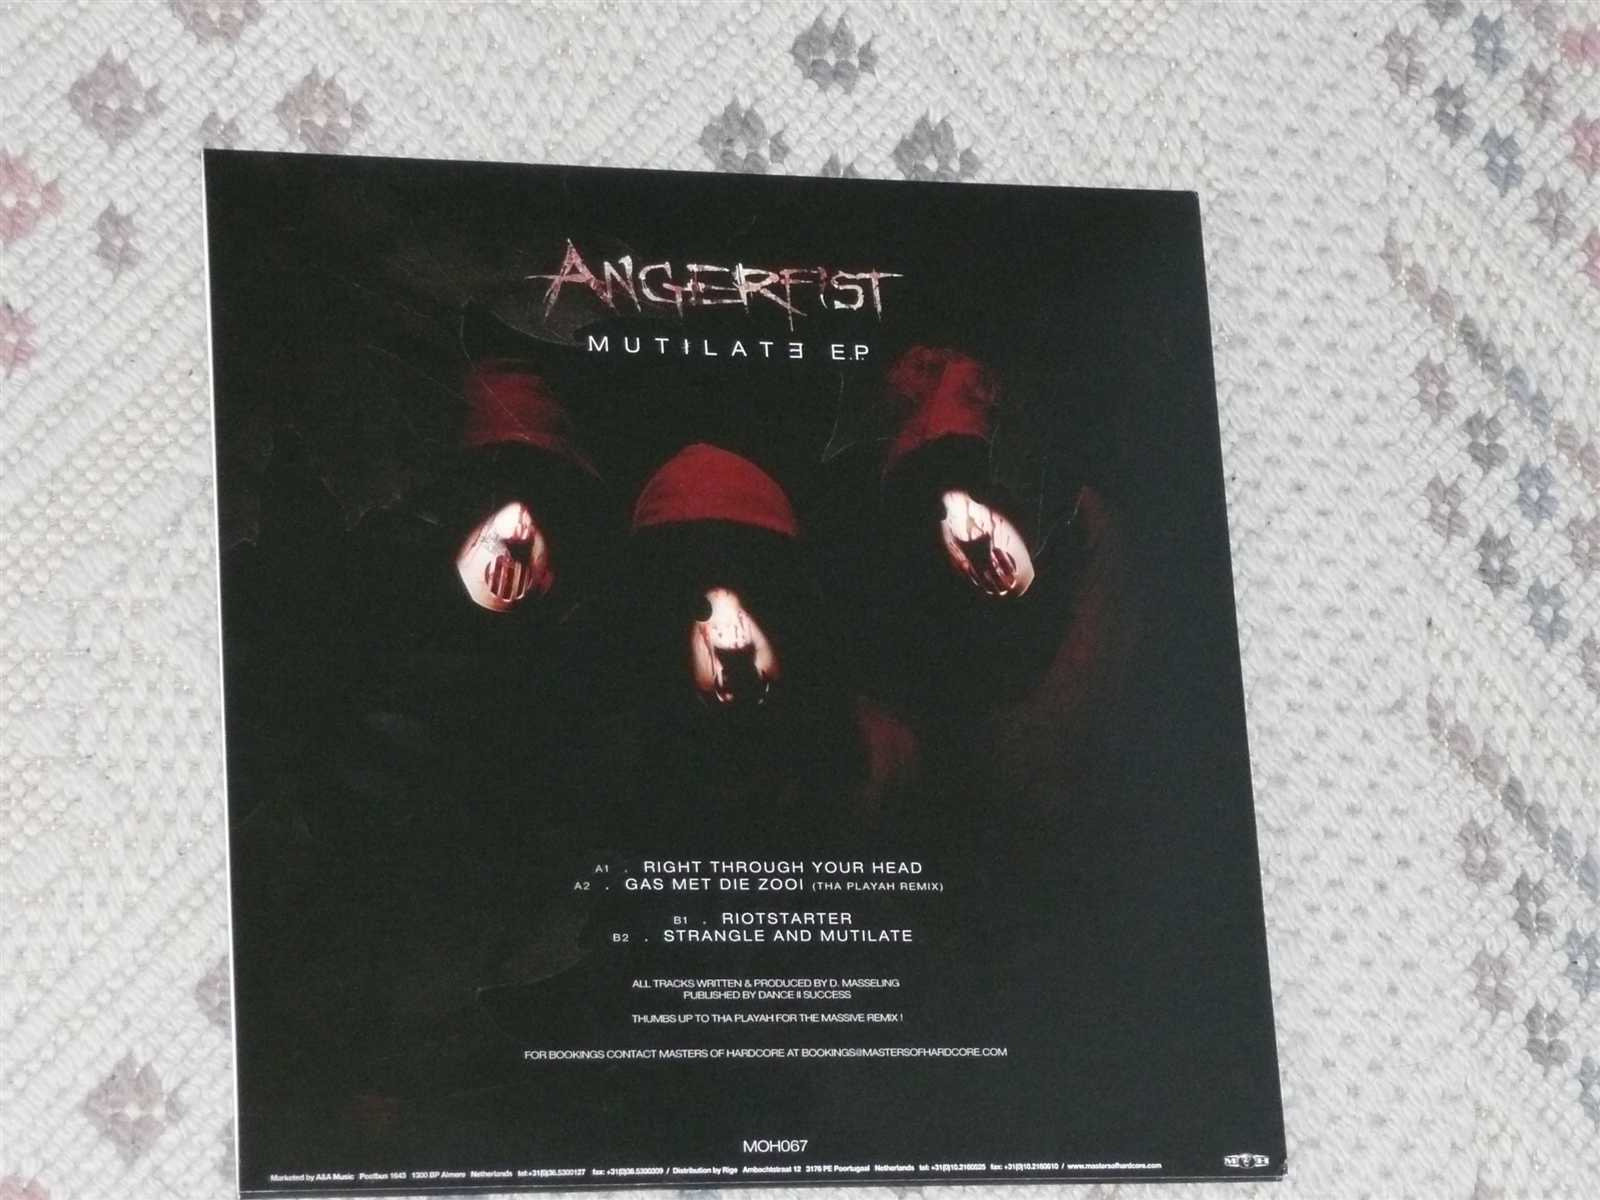 (MOH067) Angerfist - Mutilate (back)